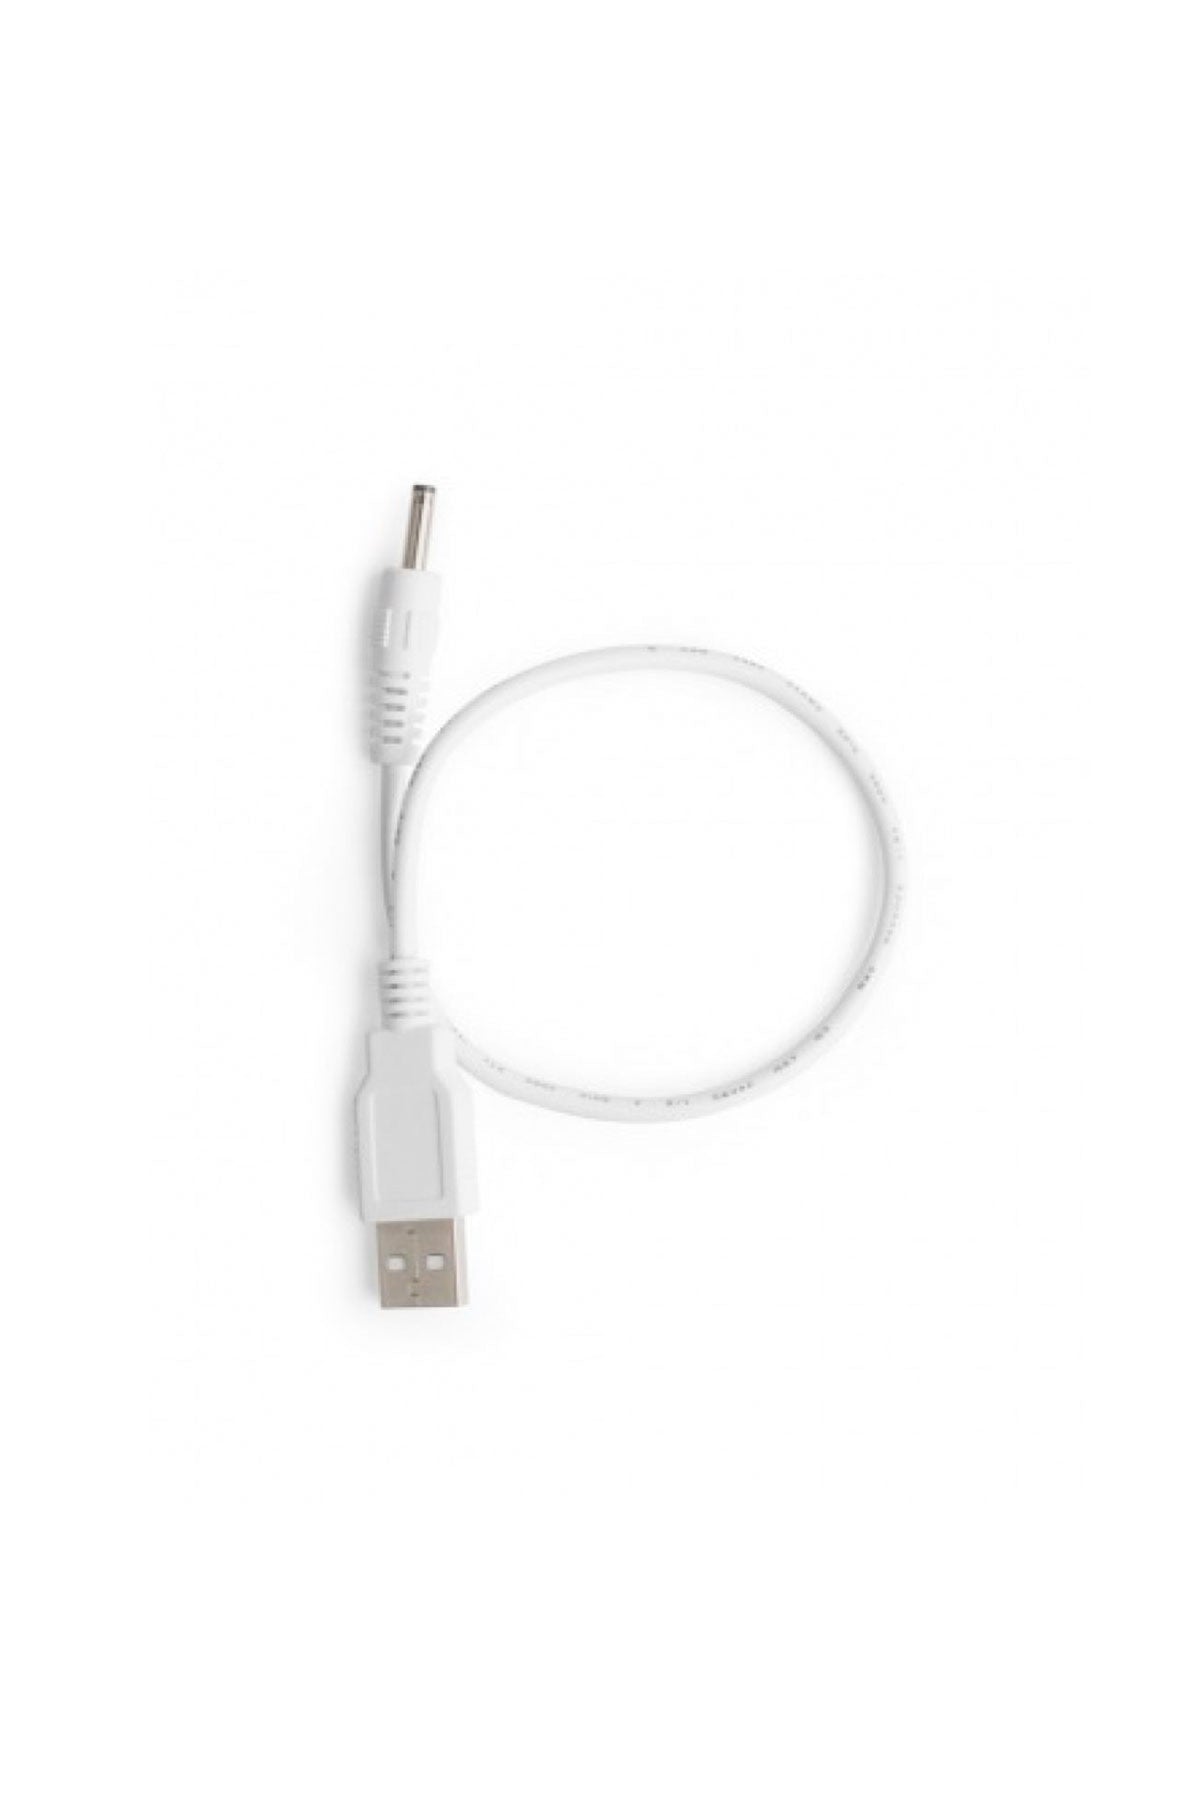 LELO Replacement Charger Cable